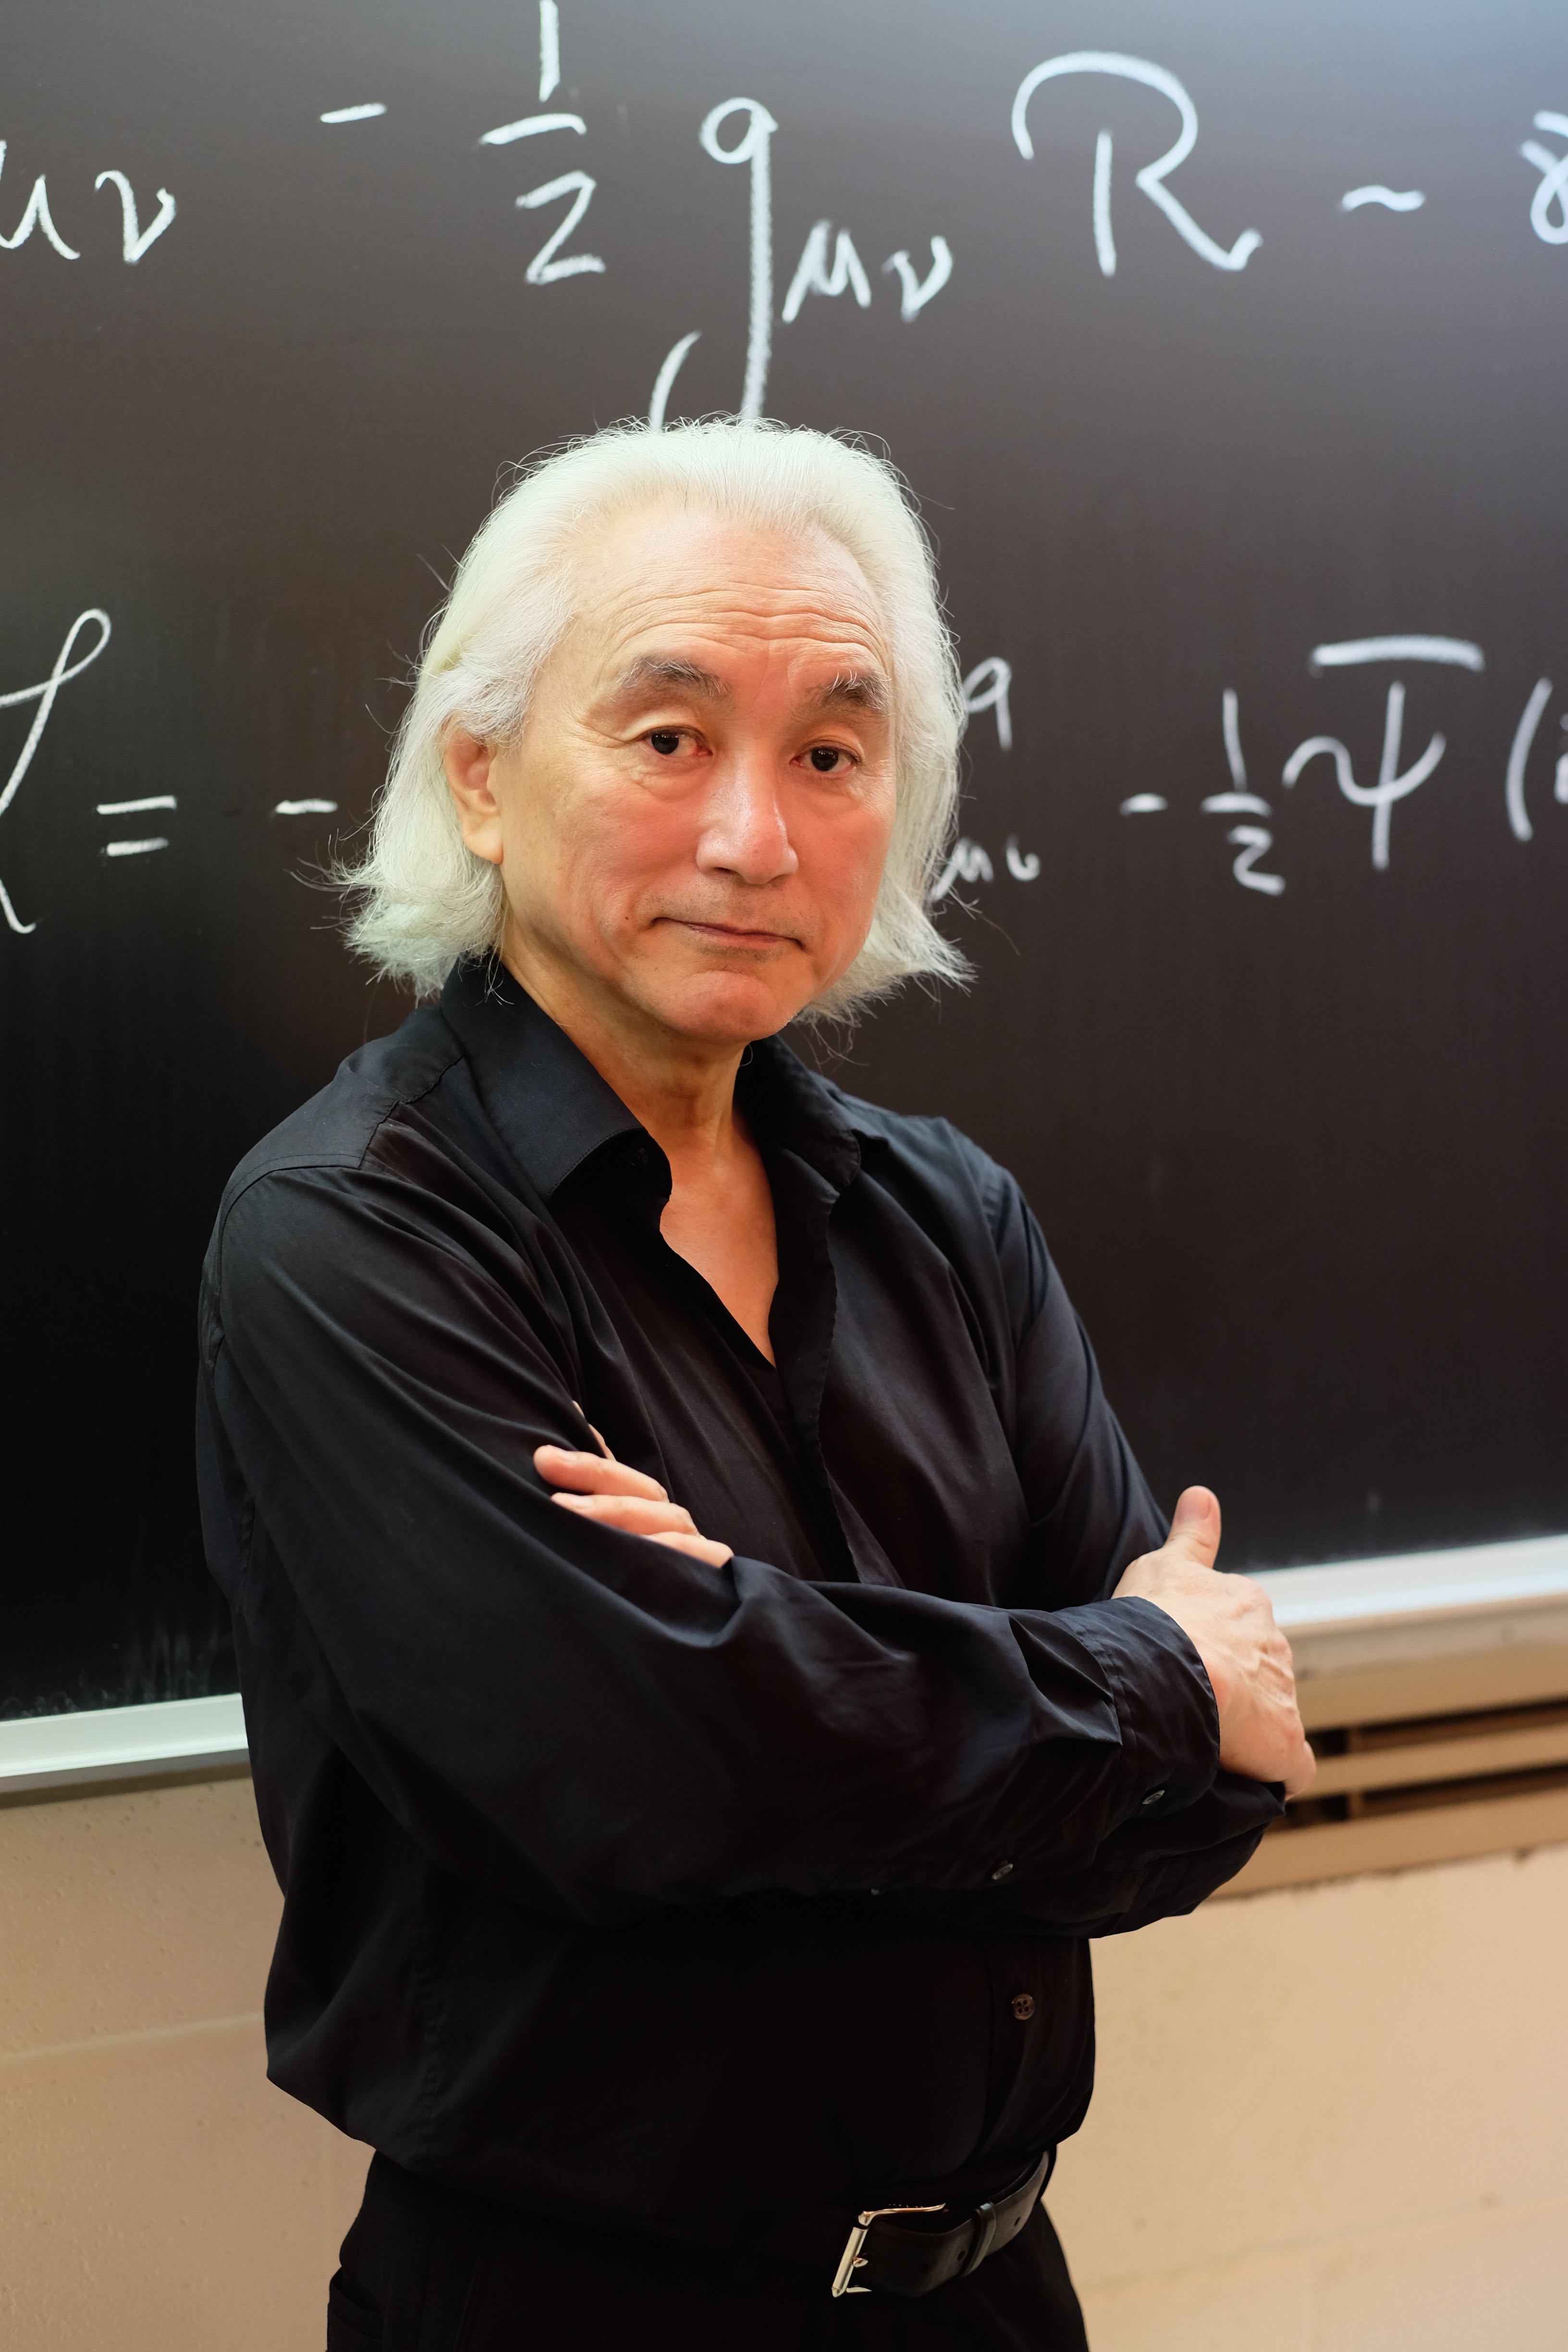 Dr. Kaku poses next to a chalkboard at the City College of New York.